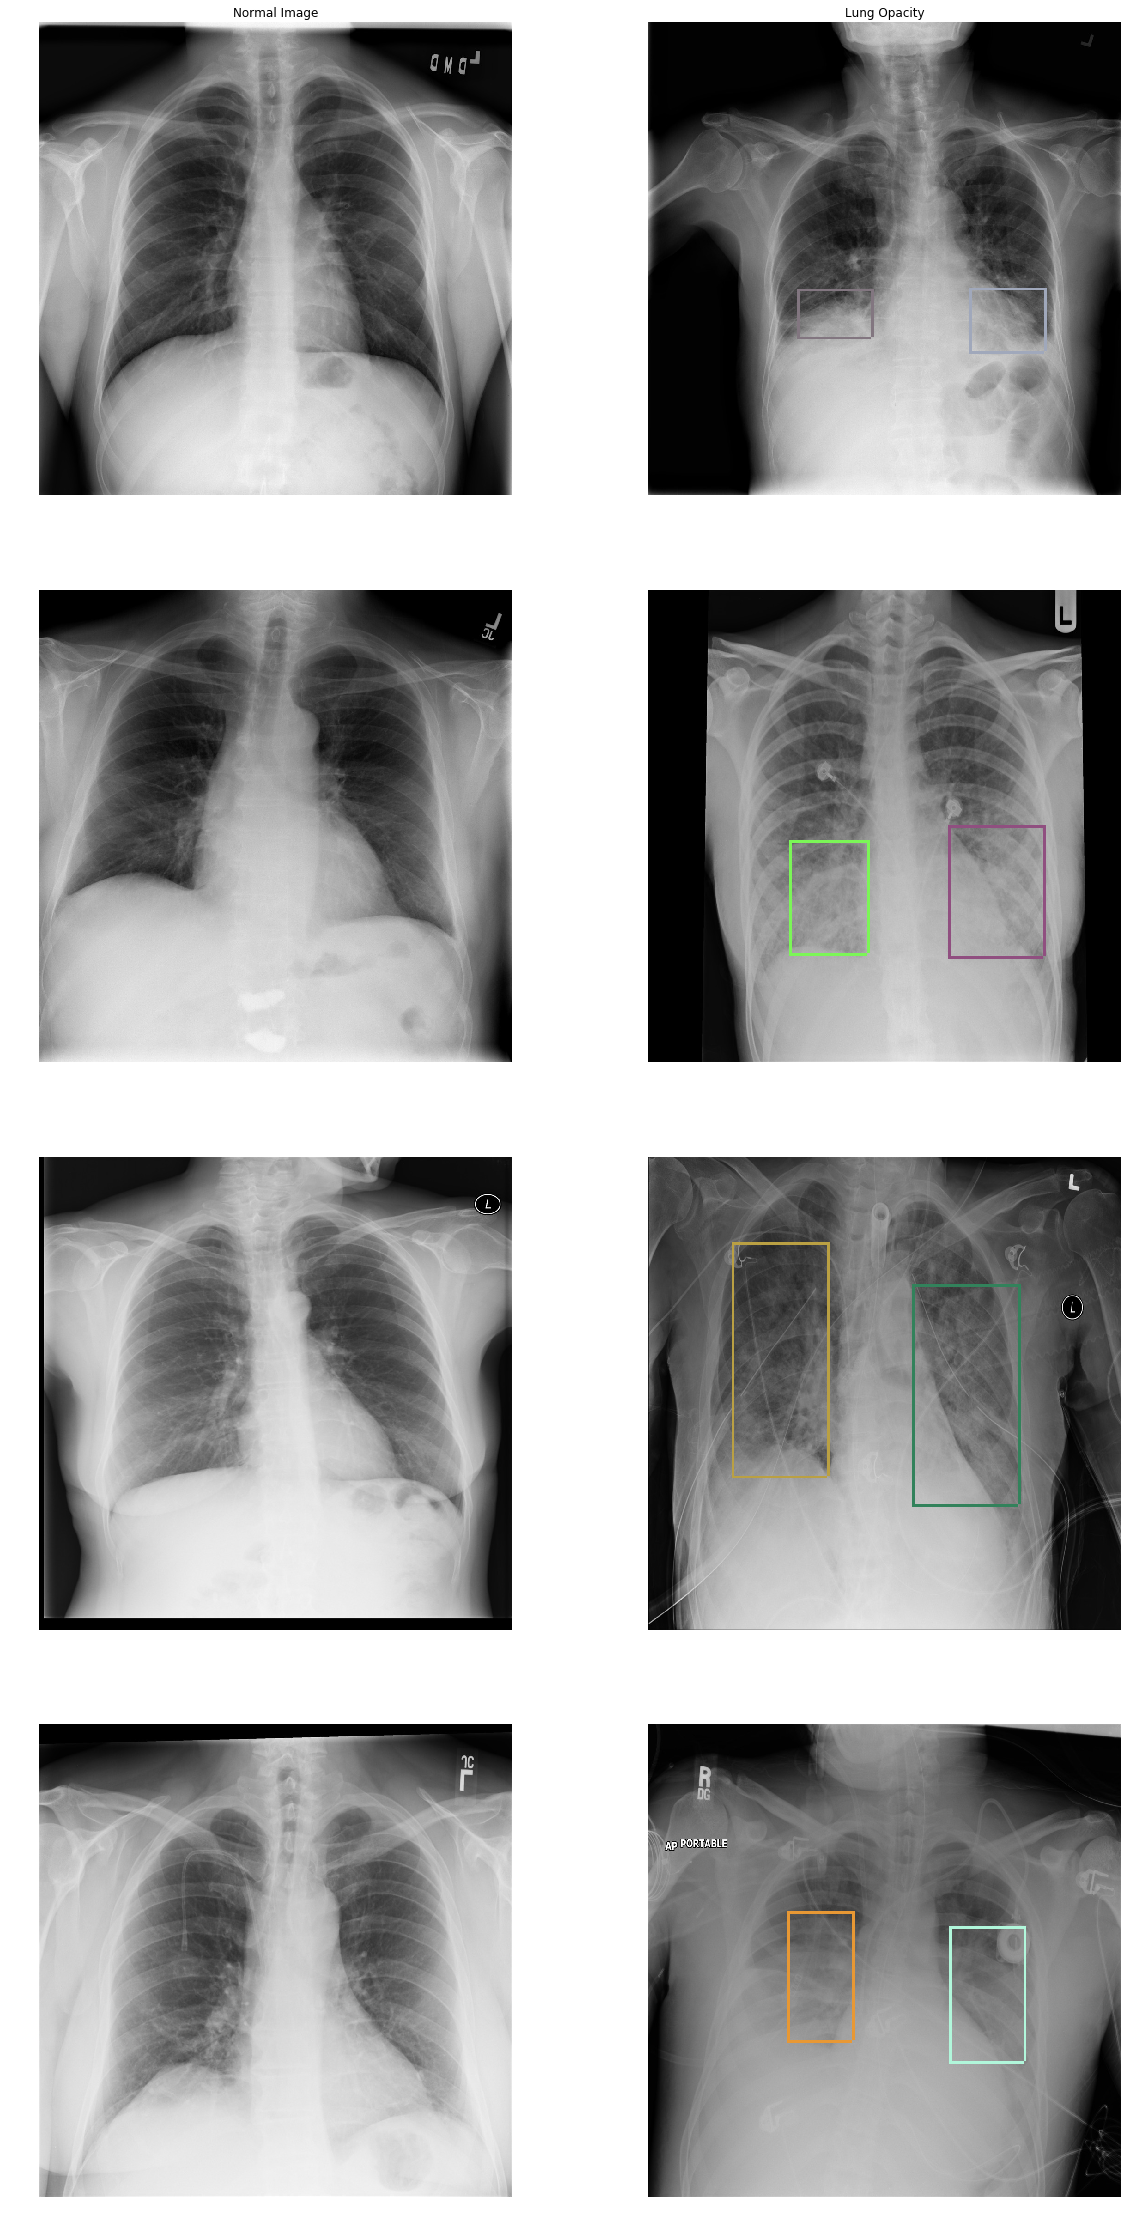 Normal vs Lung Opacity image